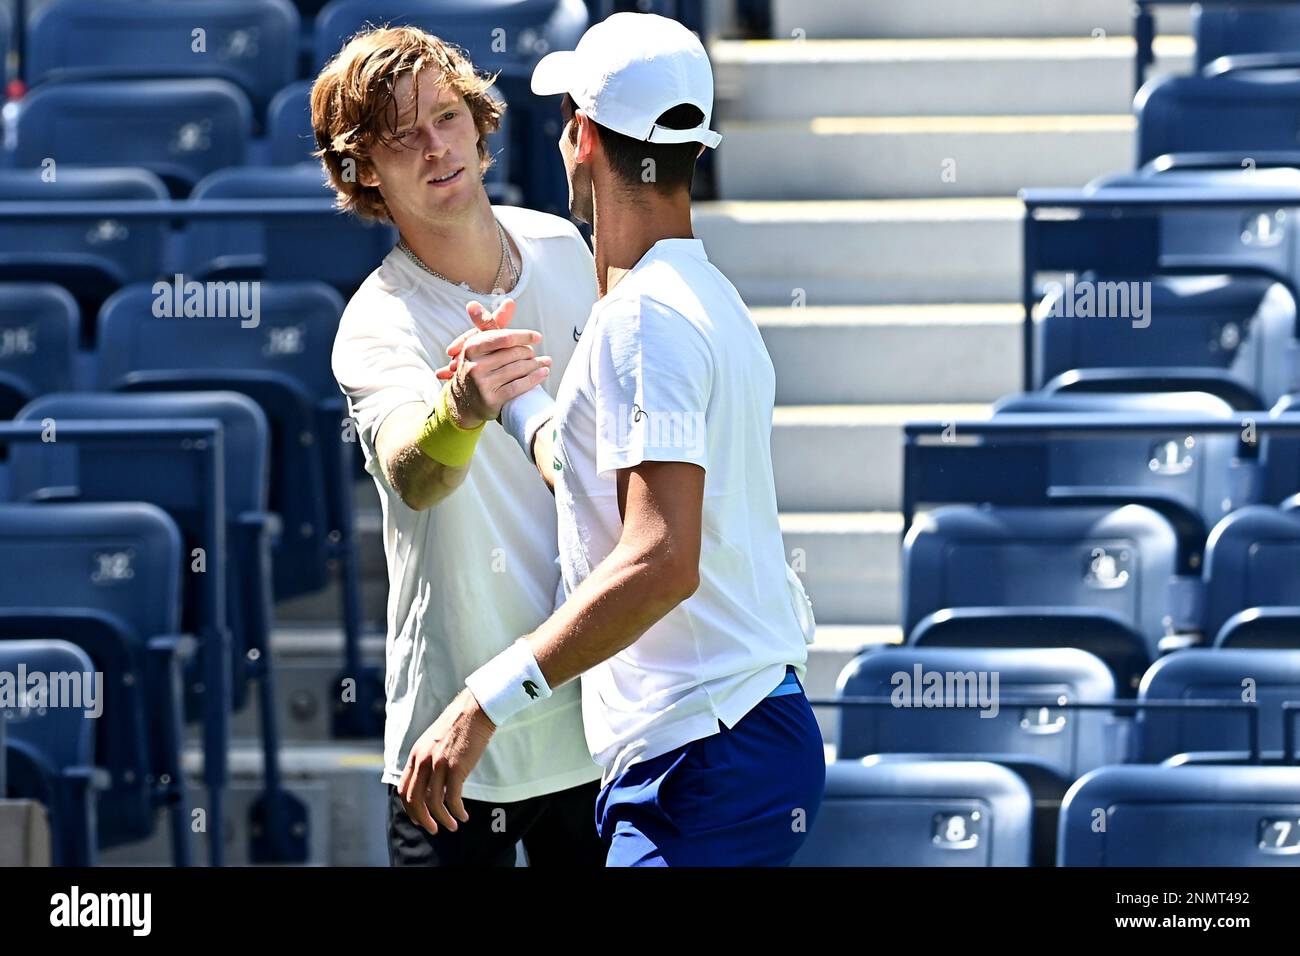 Andrey Rublev shakes hands with Novak Djokovic during practice at the 2021 US Open, Wednesday, Aug